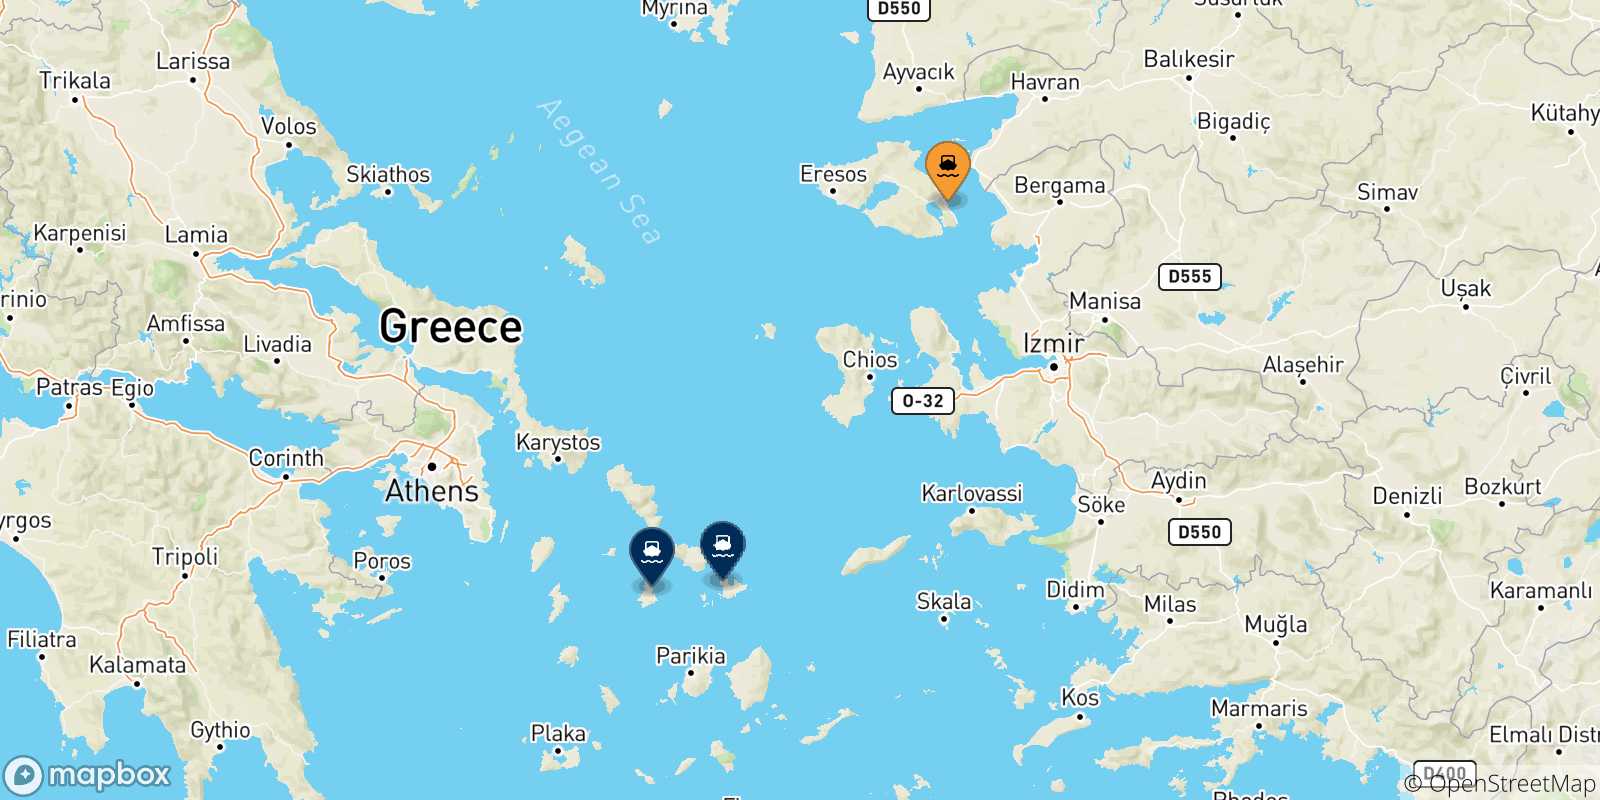 Map of the possible routes between Mytilene (Lesvos) and Cyclades Islands